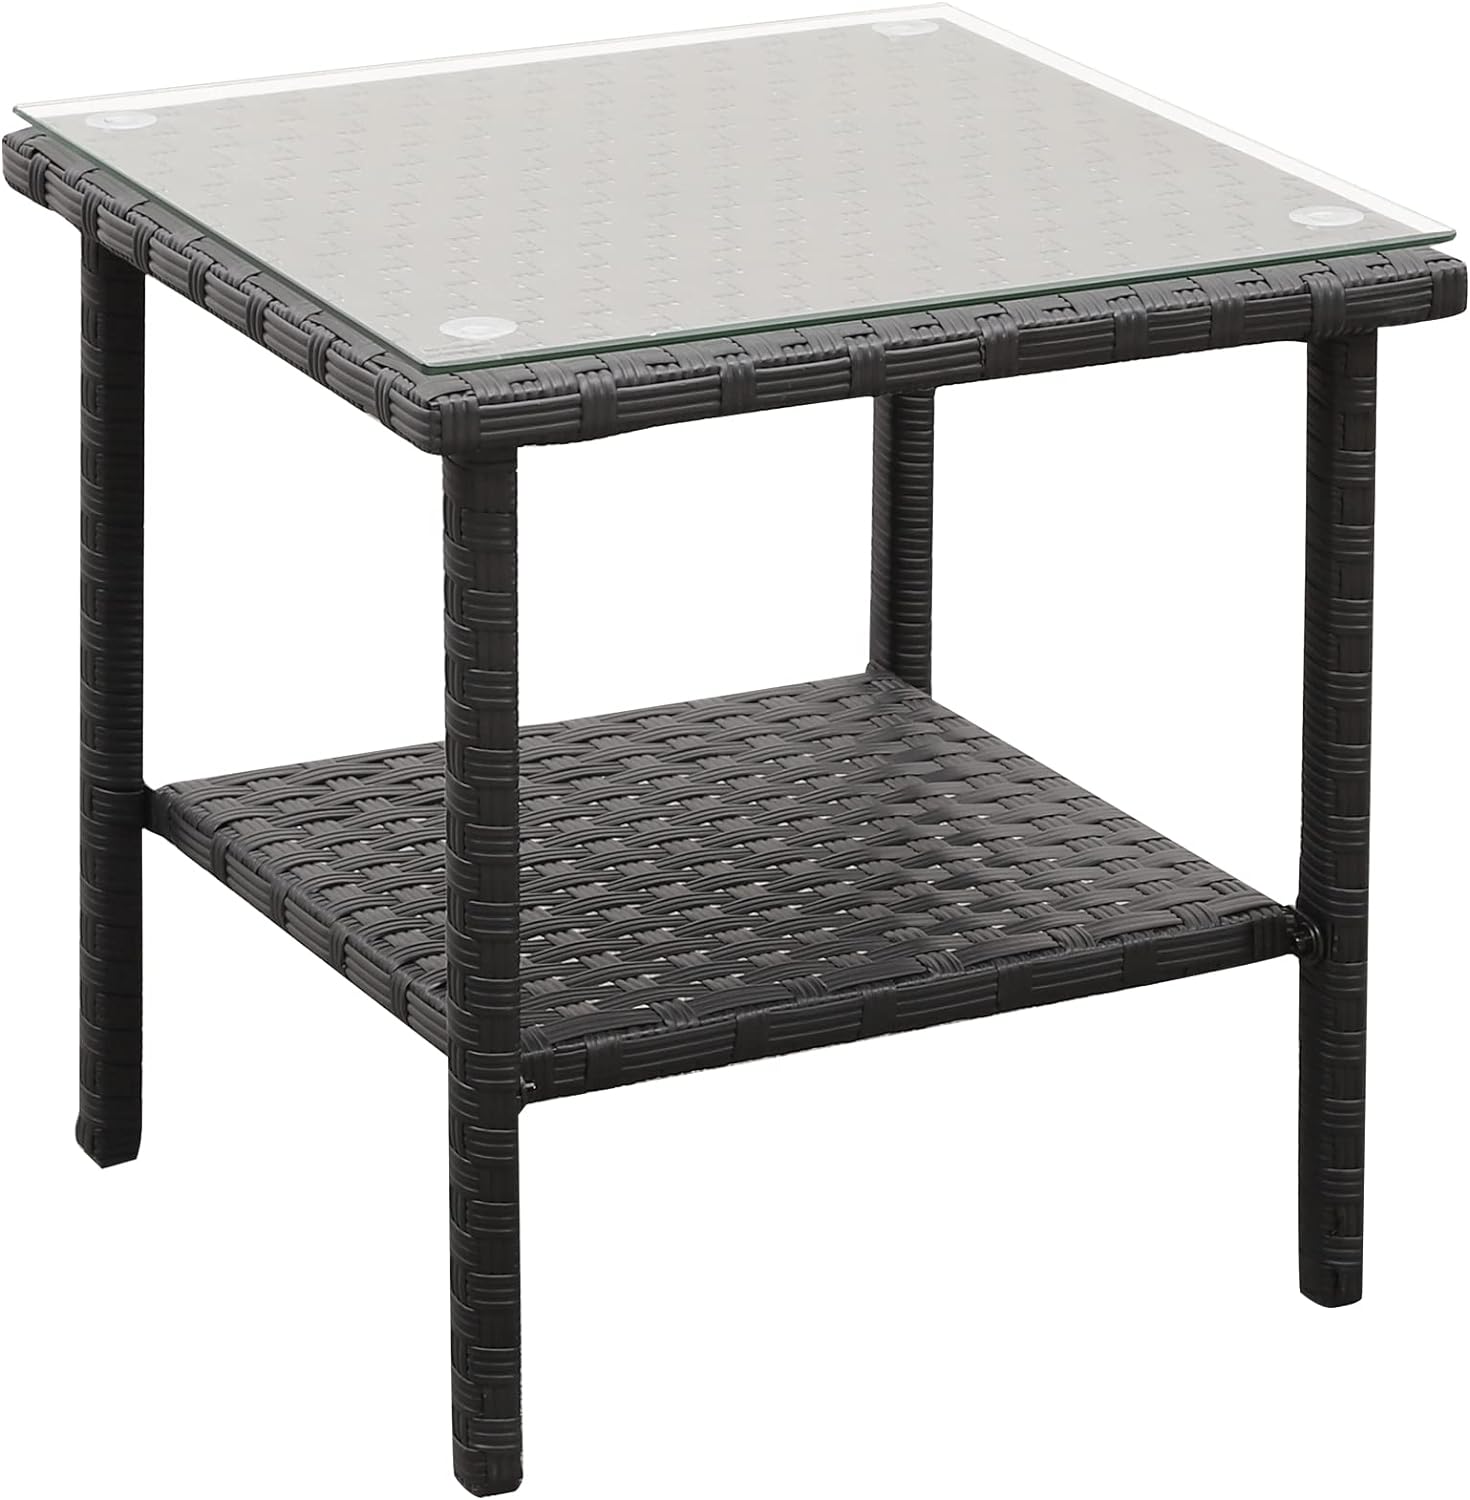 Rattaner Outdoor PE Wicker Rattan Side Table - Patio Rattan Garden Coffee End Square Table with Glass Top-2-layer Table Furniture, Black